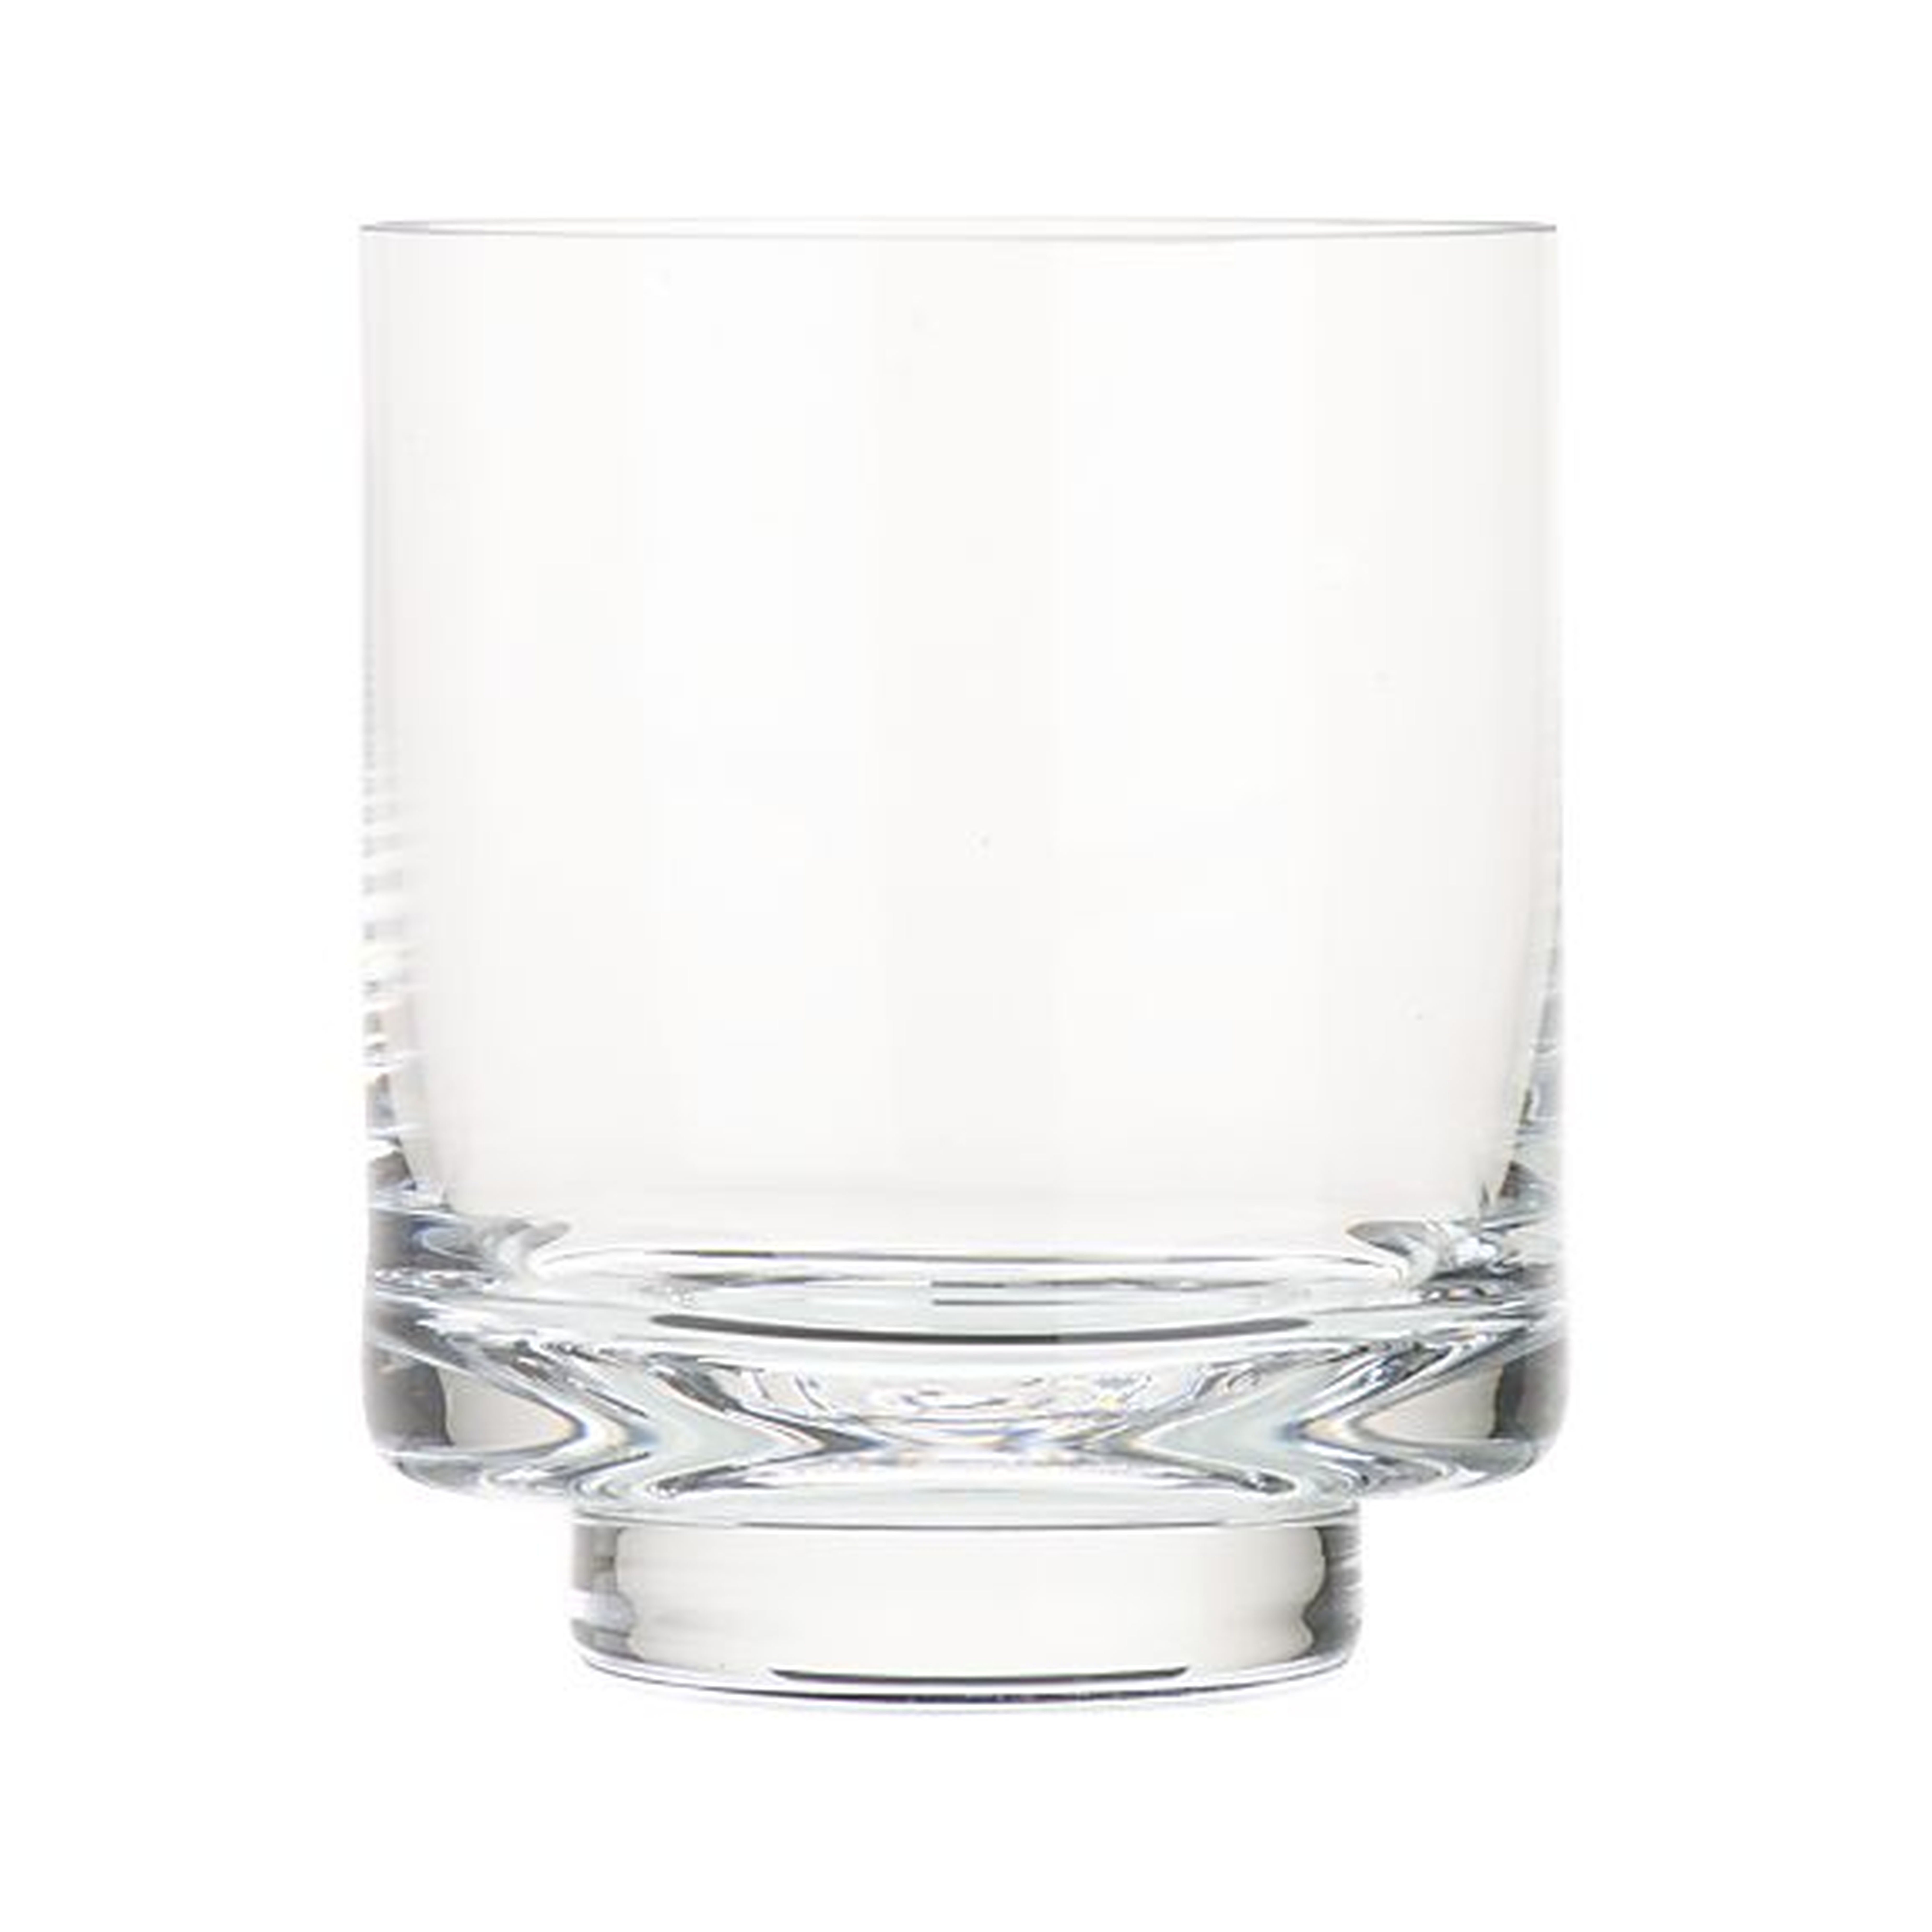 Taylor Hurricane Candle Holder - Small - Crate and Barrel